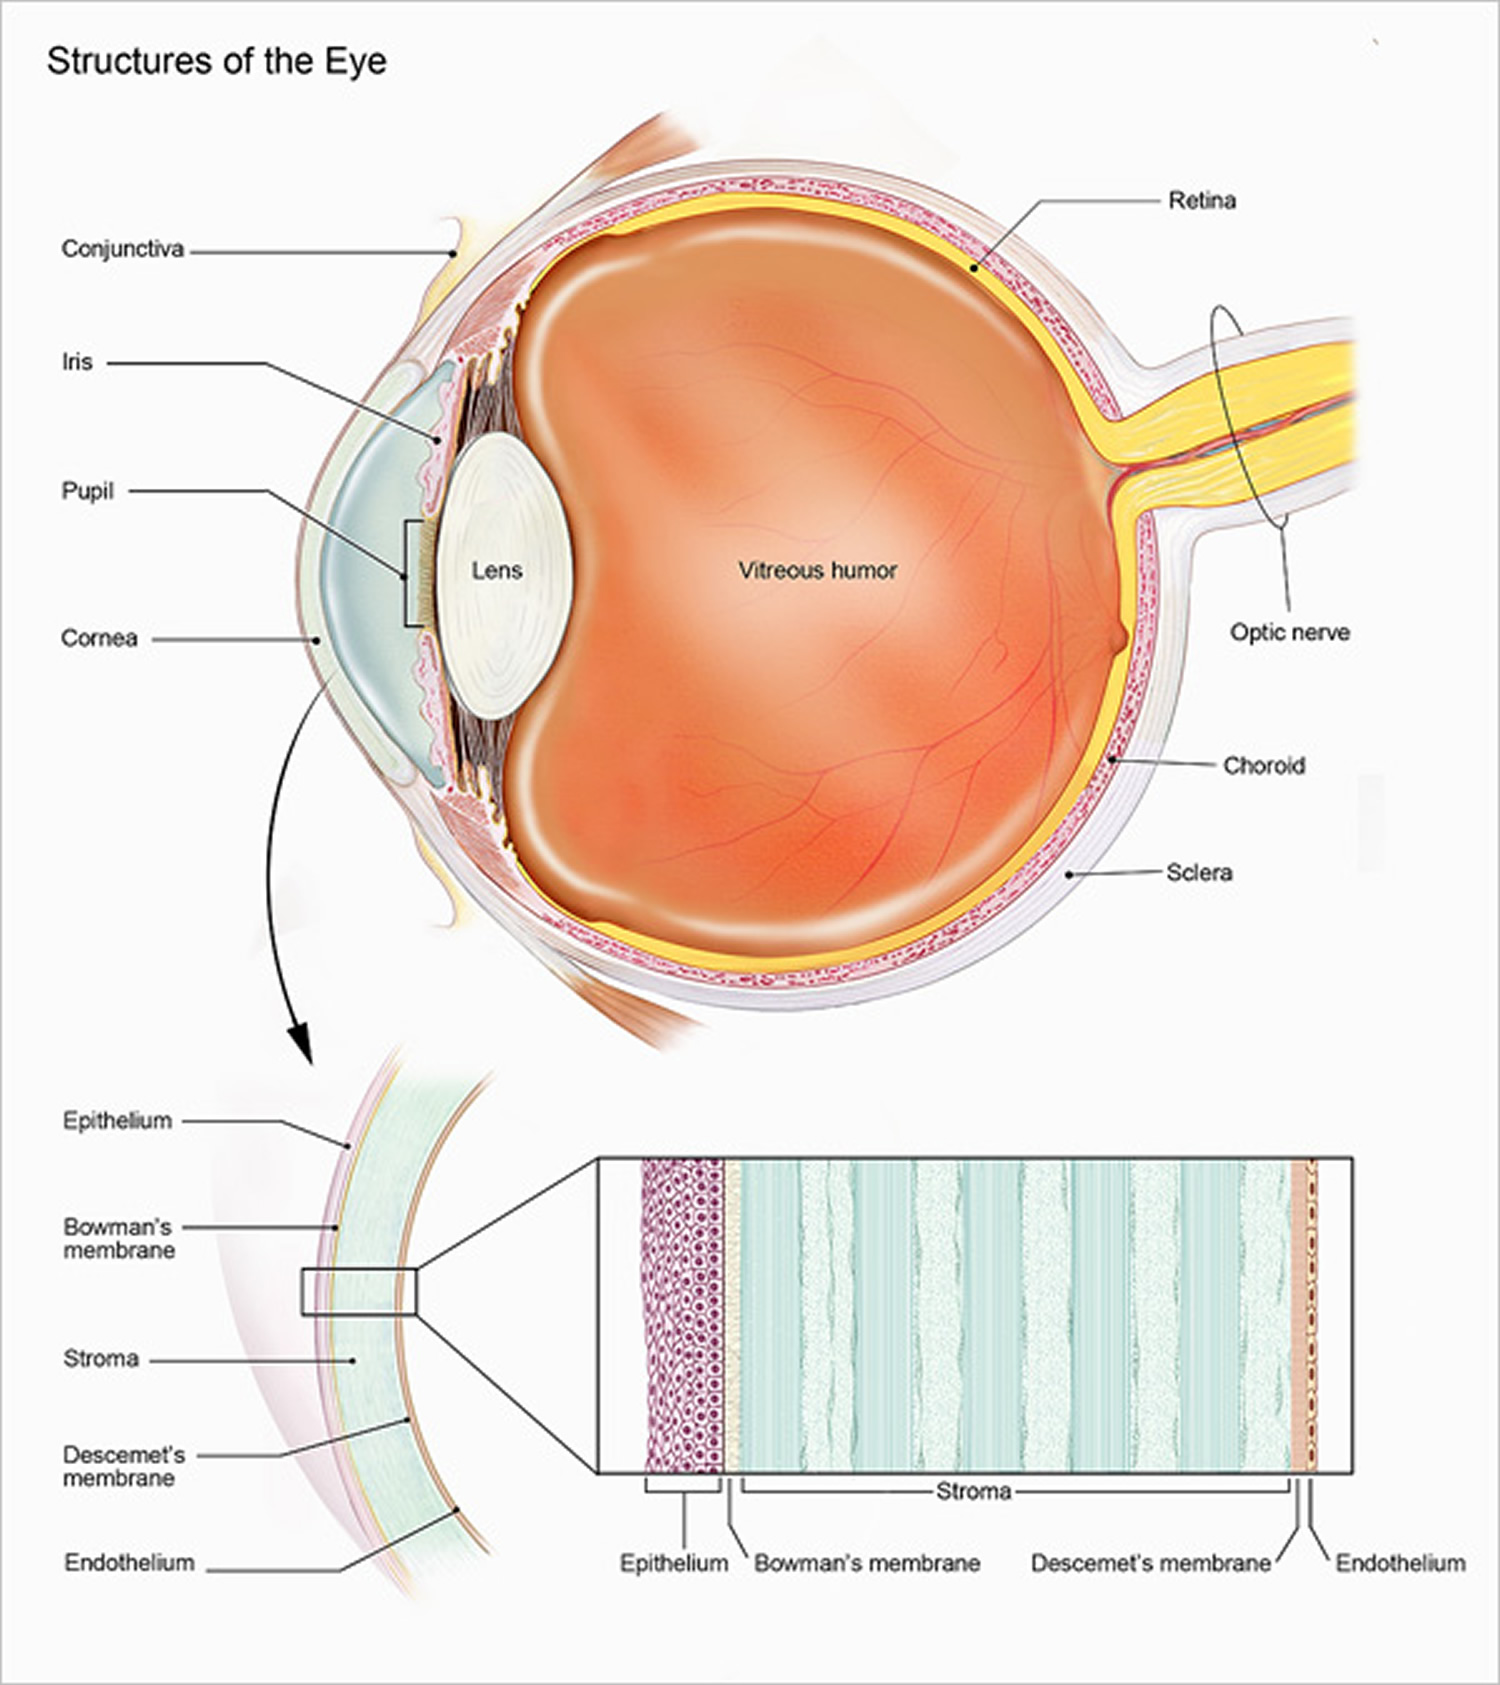 Human Eye Anatomy - Parts of the Eye and Structure of the Human Eye